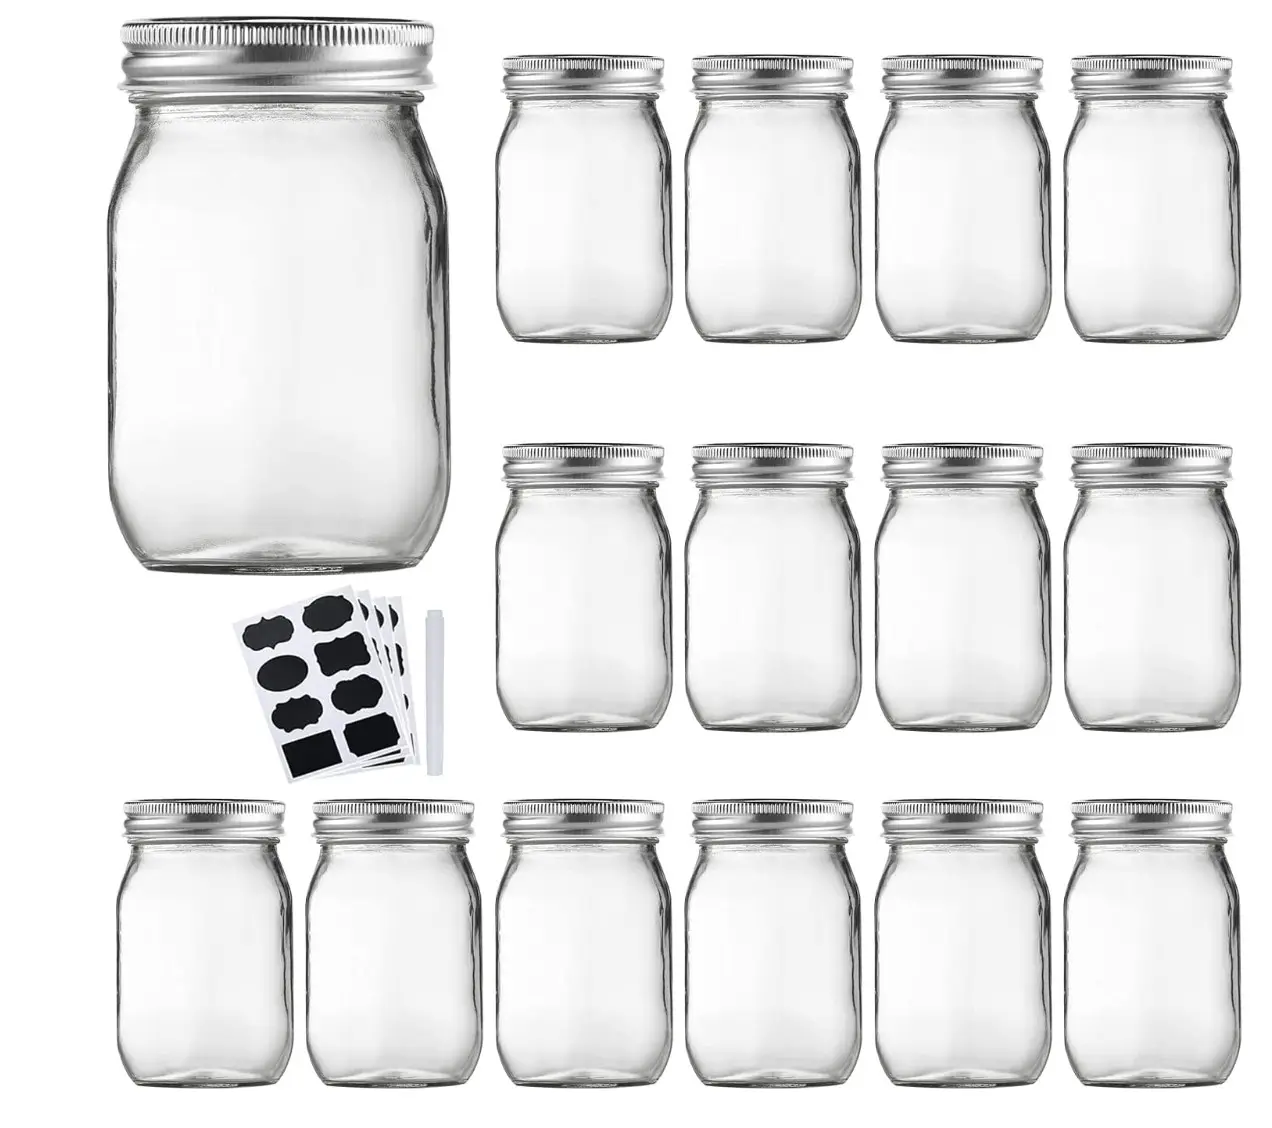 16 OZ Canning Jars Glass Jars with Regular Lids and Bands, Ideal for Jam, Honey